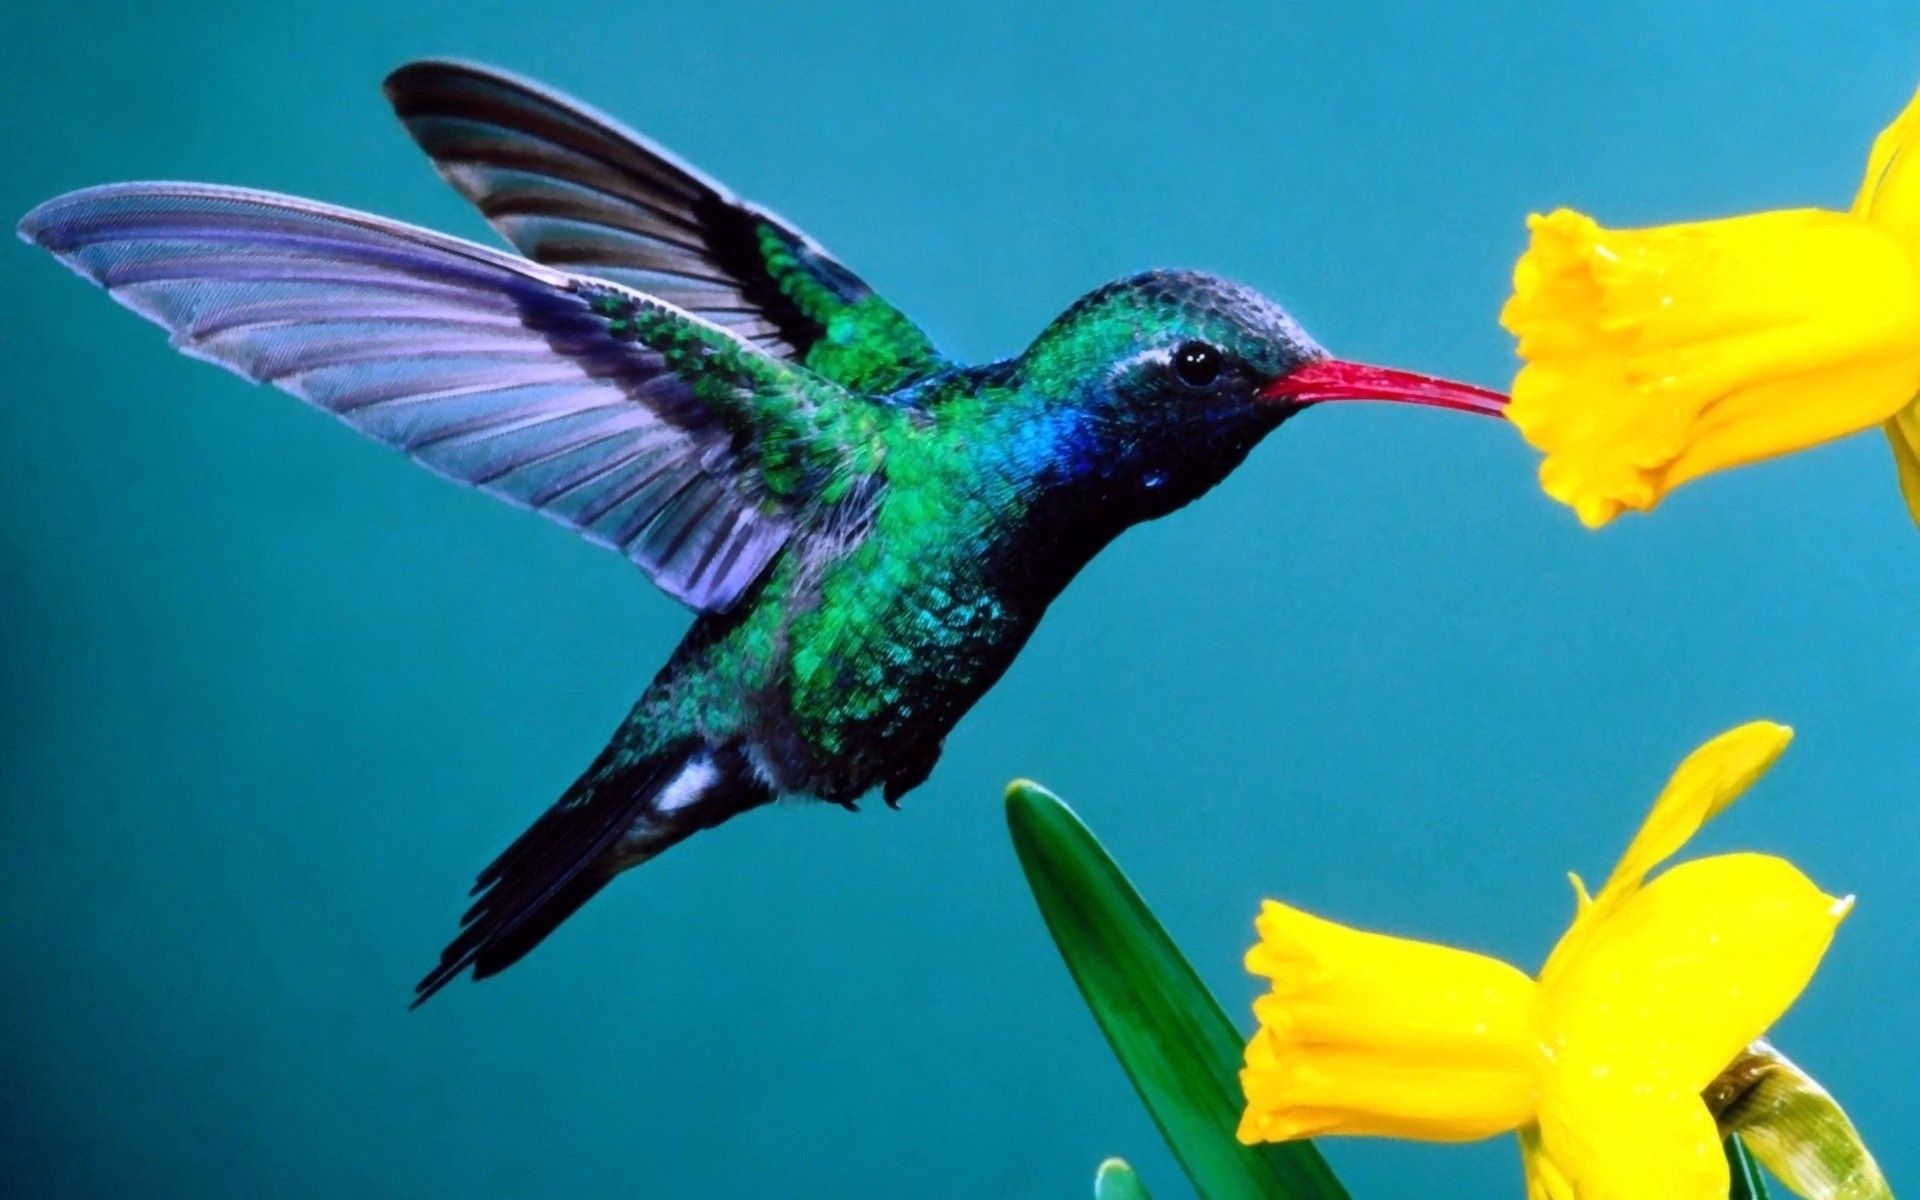  Humming Birds HQ Background Images